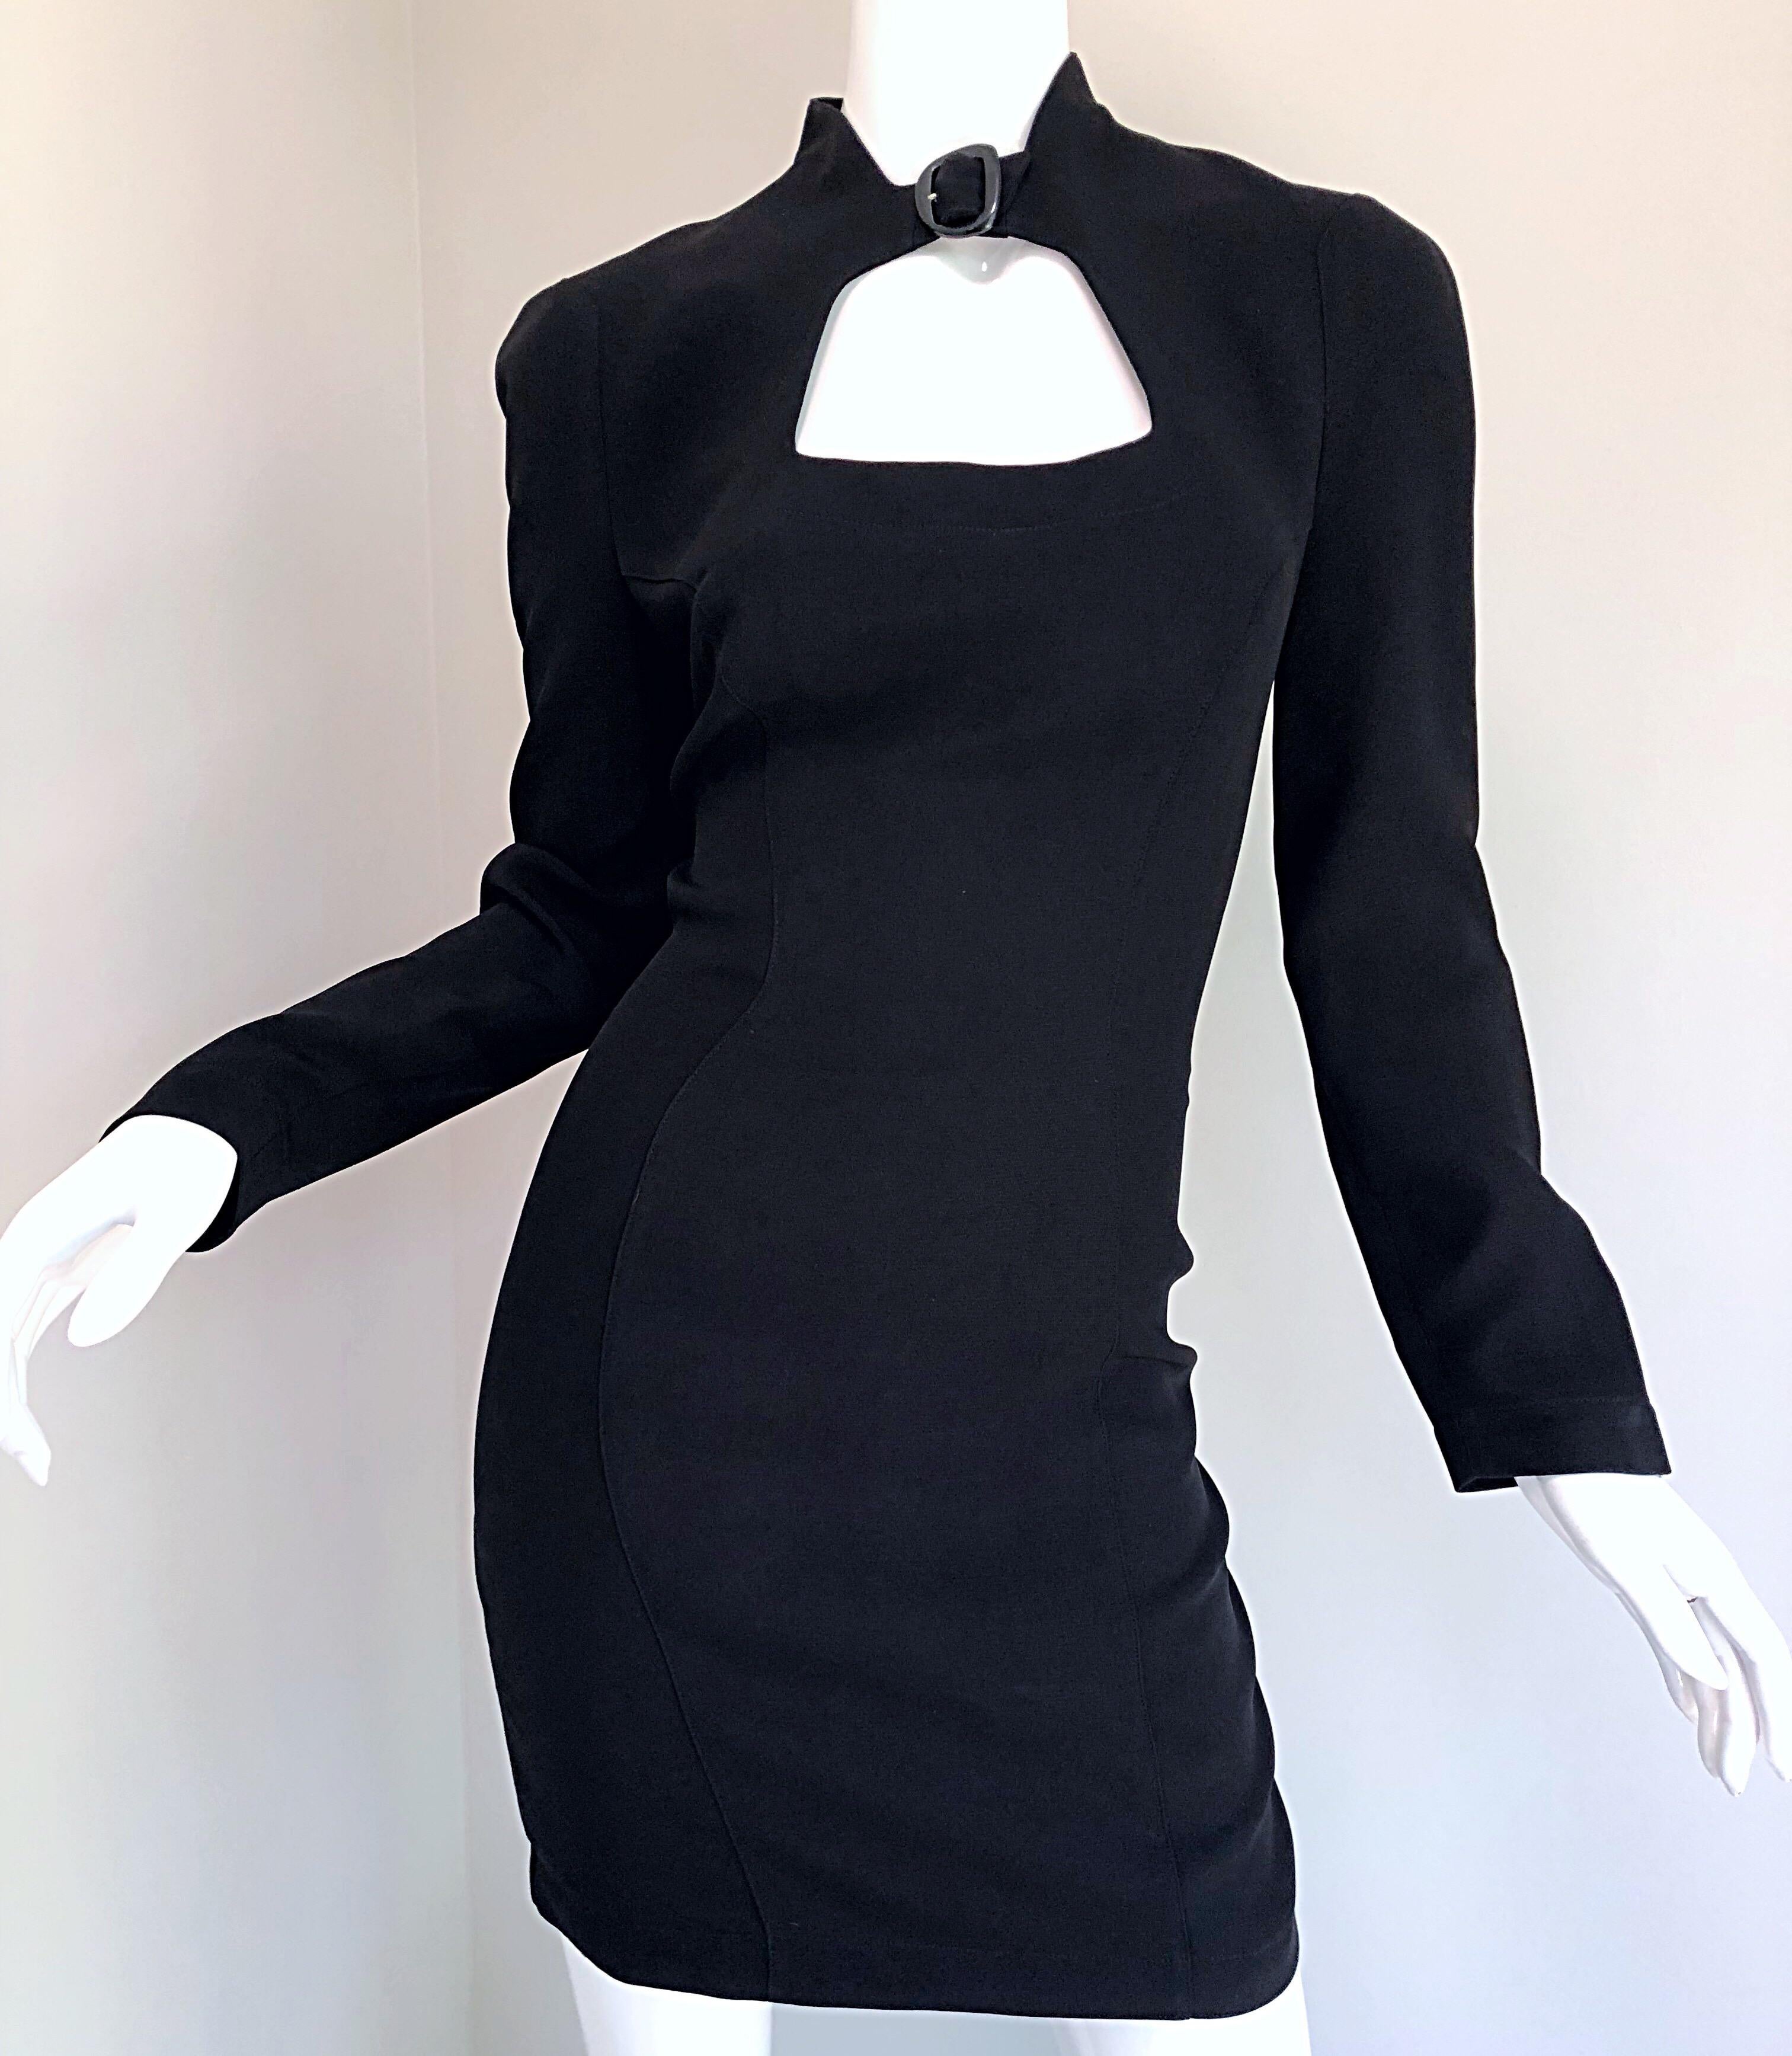 Women's Iconic Vintage Thierry Mugler 80s Bondage Inspired Cut - Out Black 1980s Dress For Sale